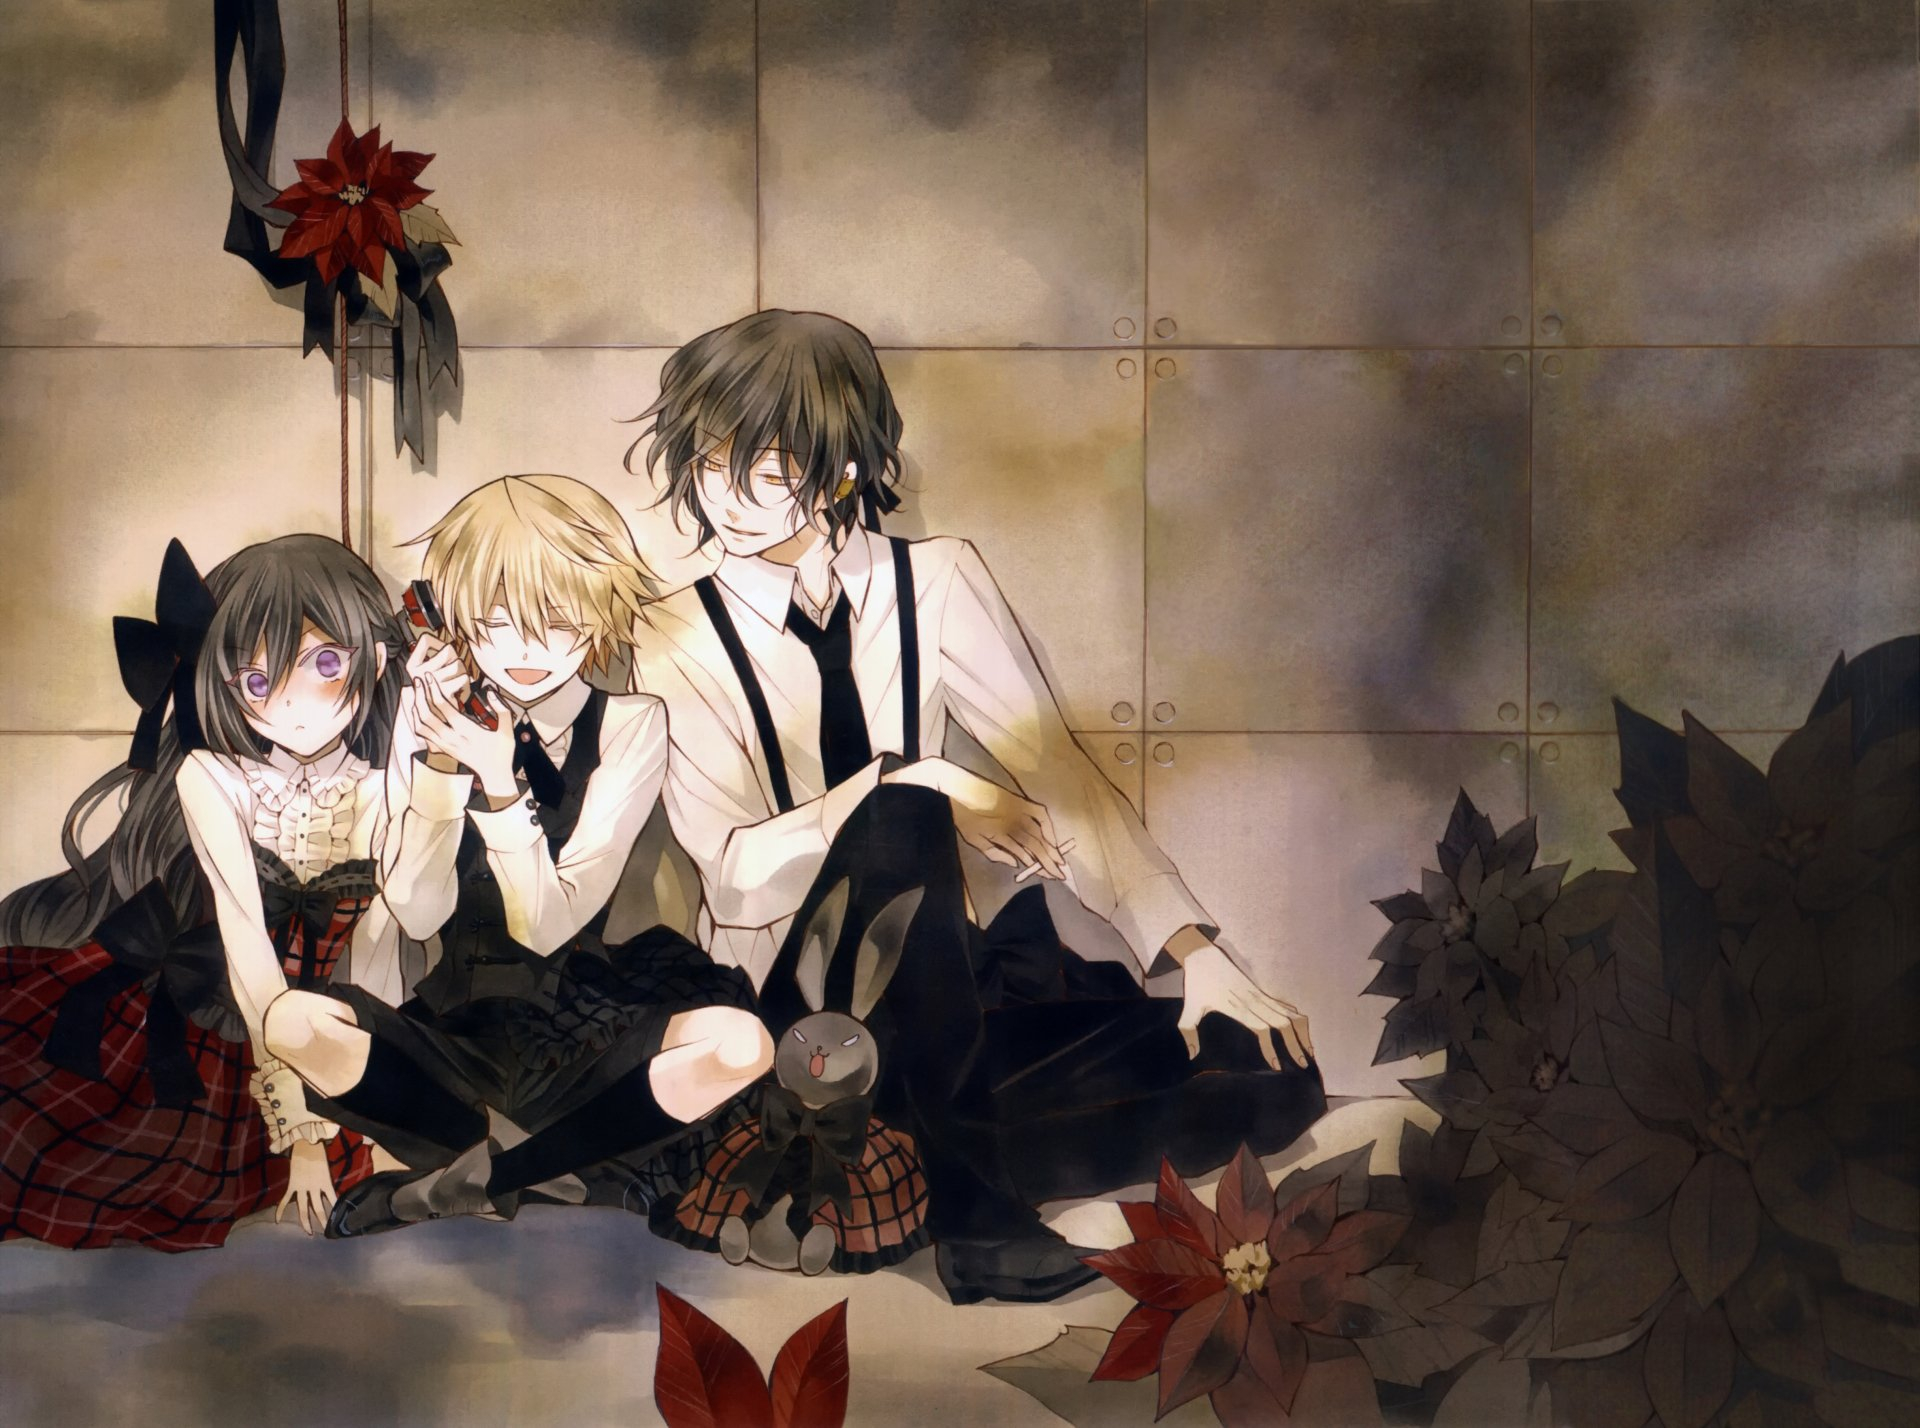 1920x1428 90+ Pandora Hearts HD Wallpapers and Backgrounds